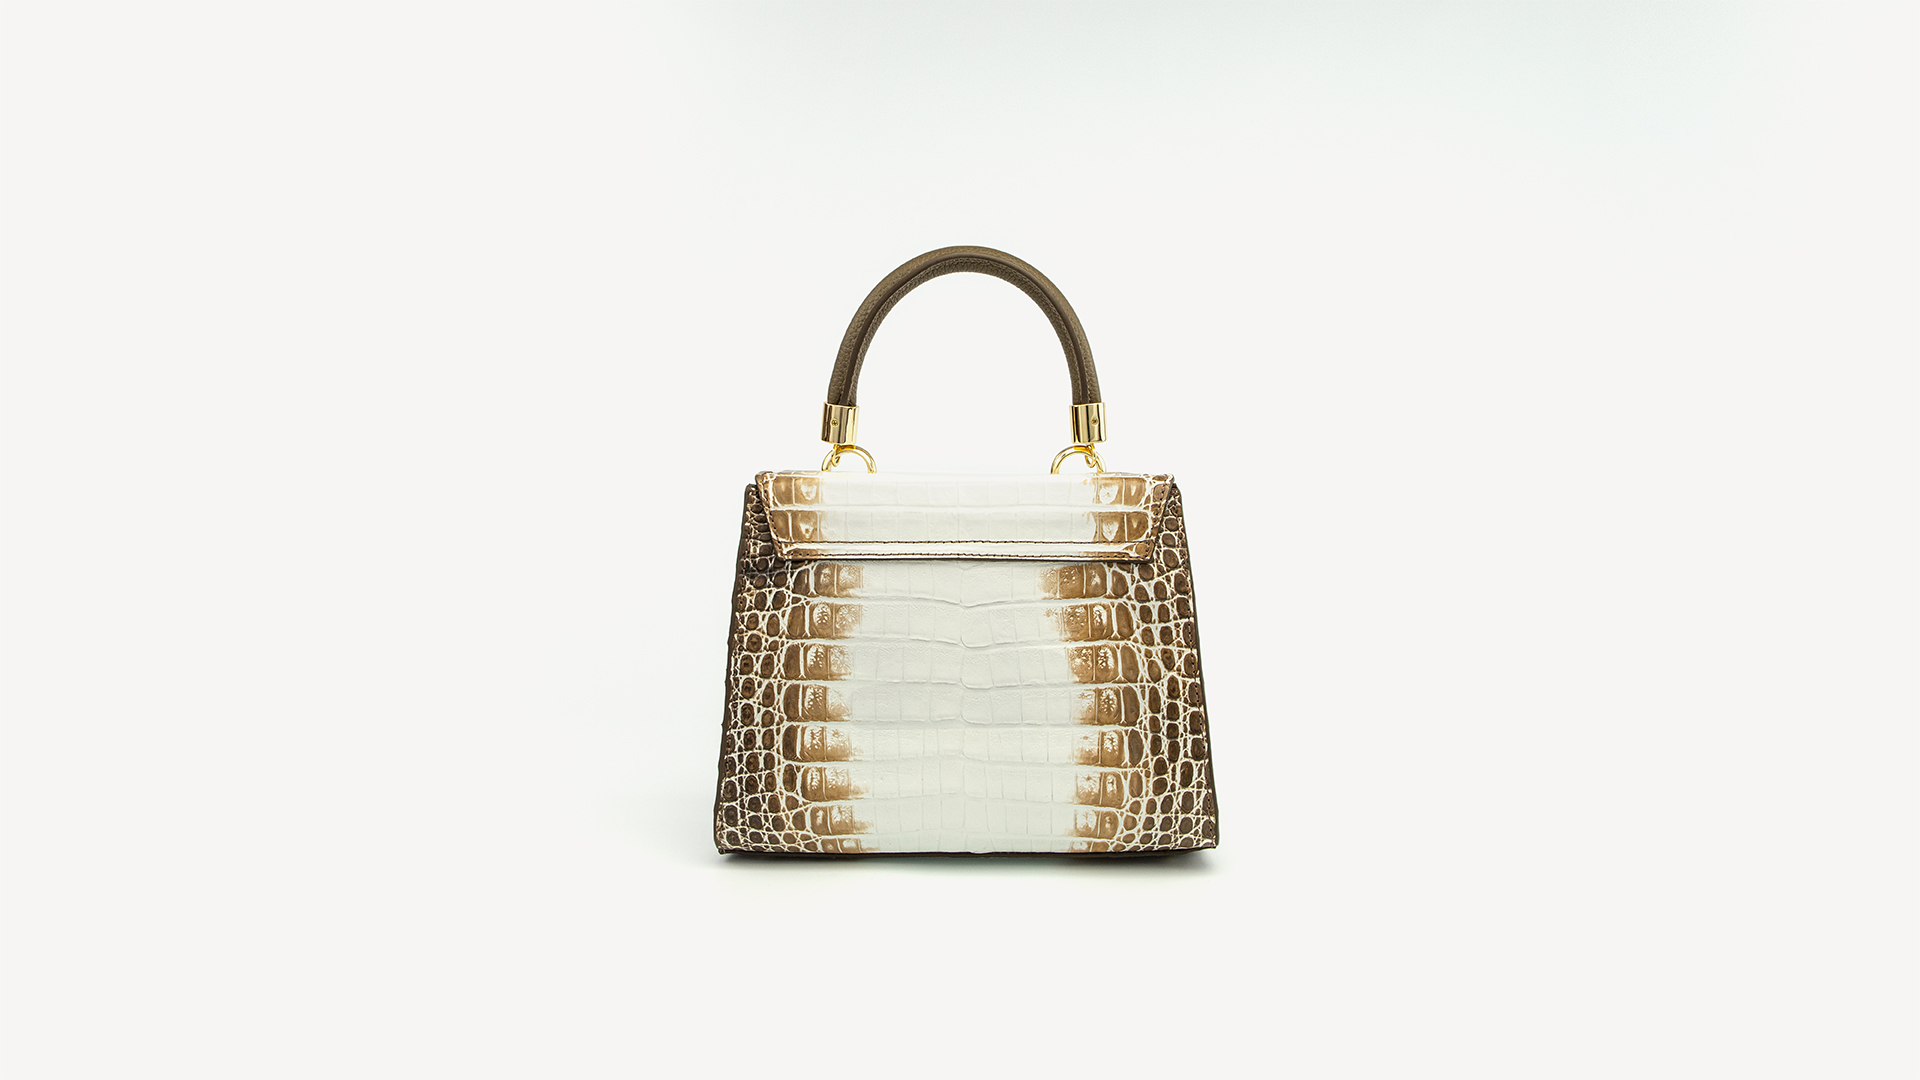 Fendi First Small - White leather bag with exotic details